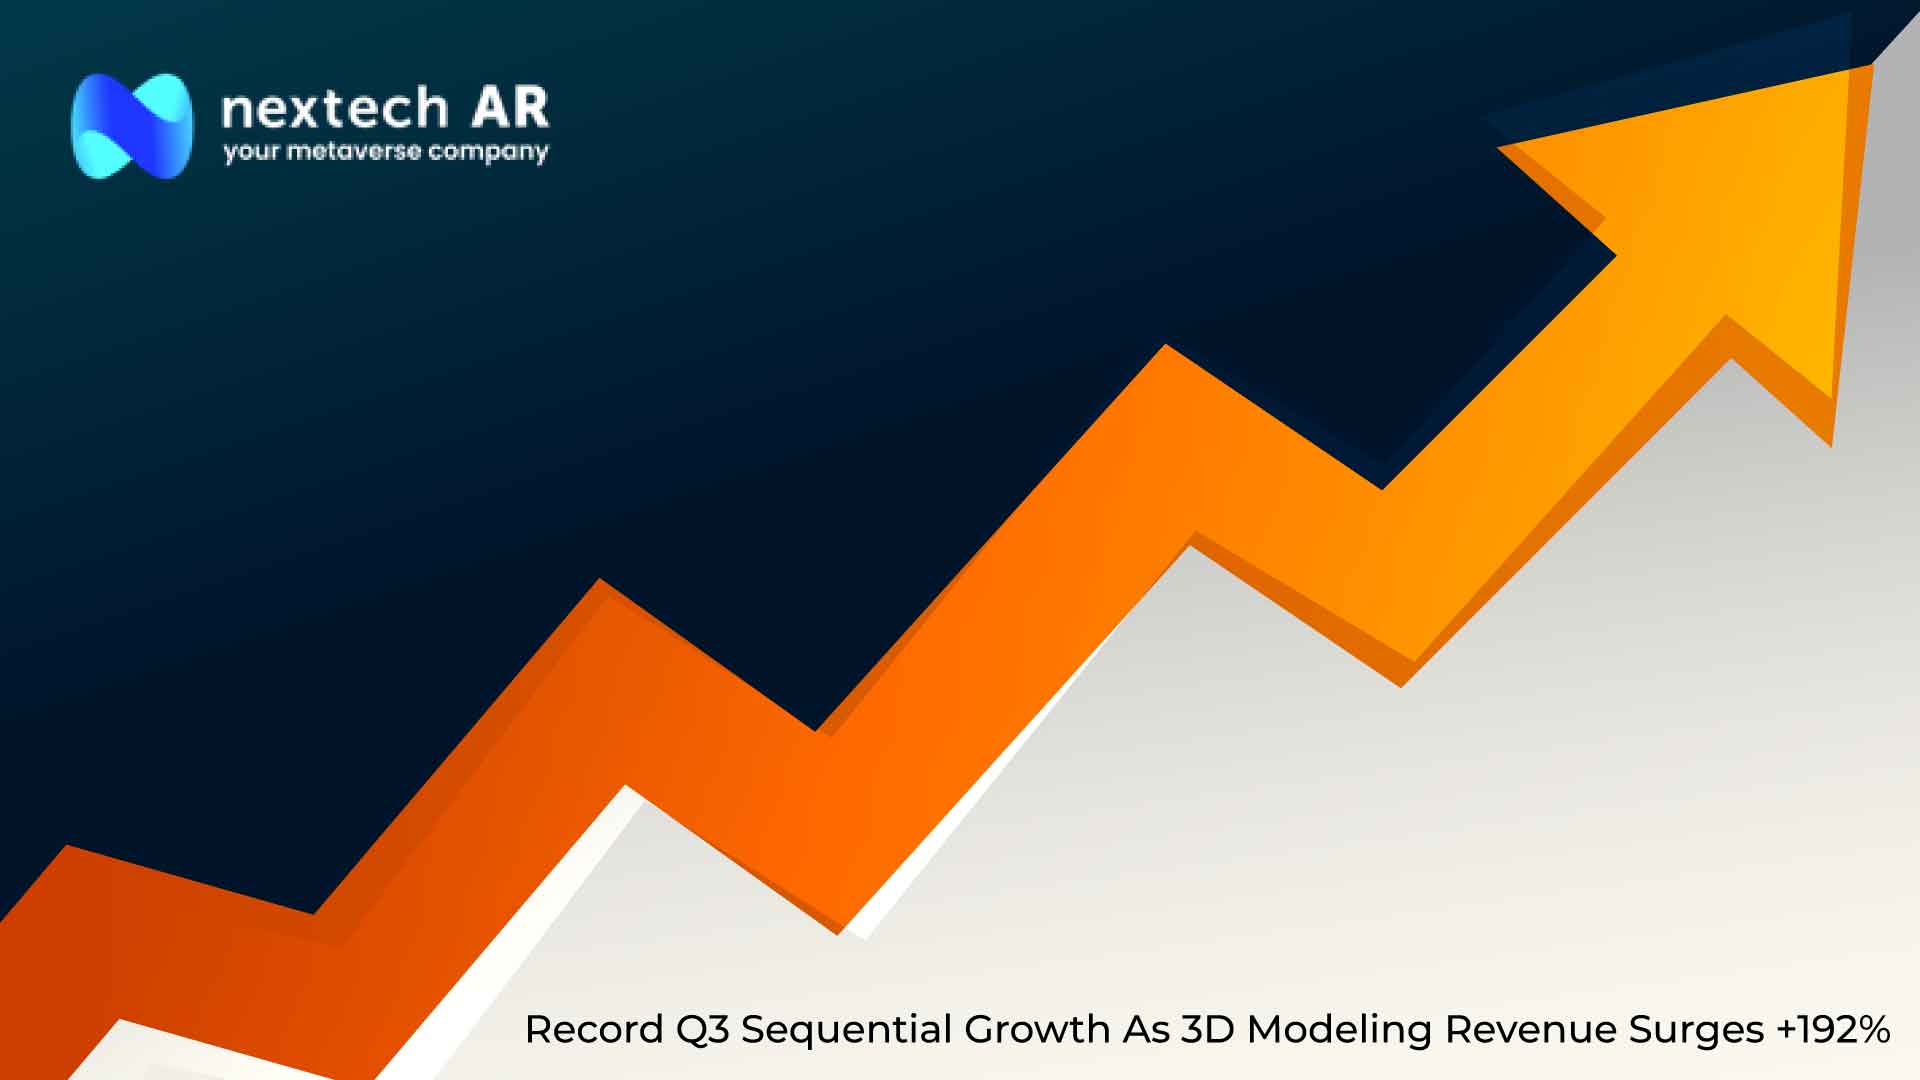 Nextech AR Solutions Corp. Reports Record Q3 Sequential Growth As 3D Modeling Revenue Surges +192% and Gross Profit Margin Improves To +60%